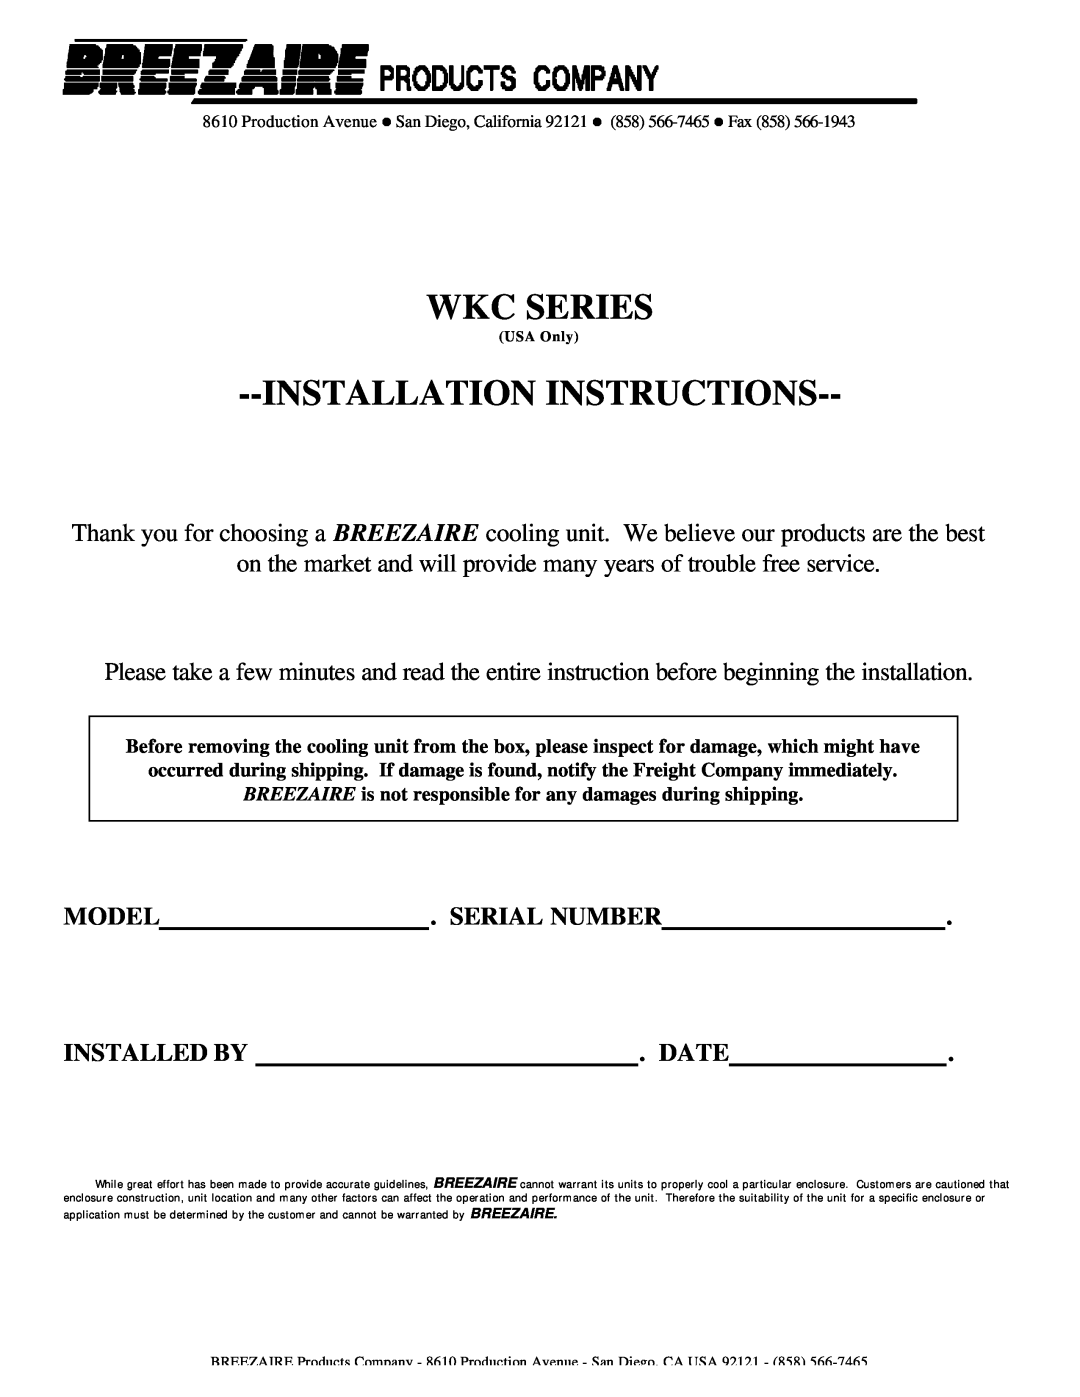 Breezaire WKC Series installation instructions Model, Serial Number, Installed By, Date, Wkc Series 